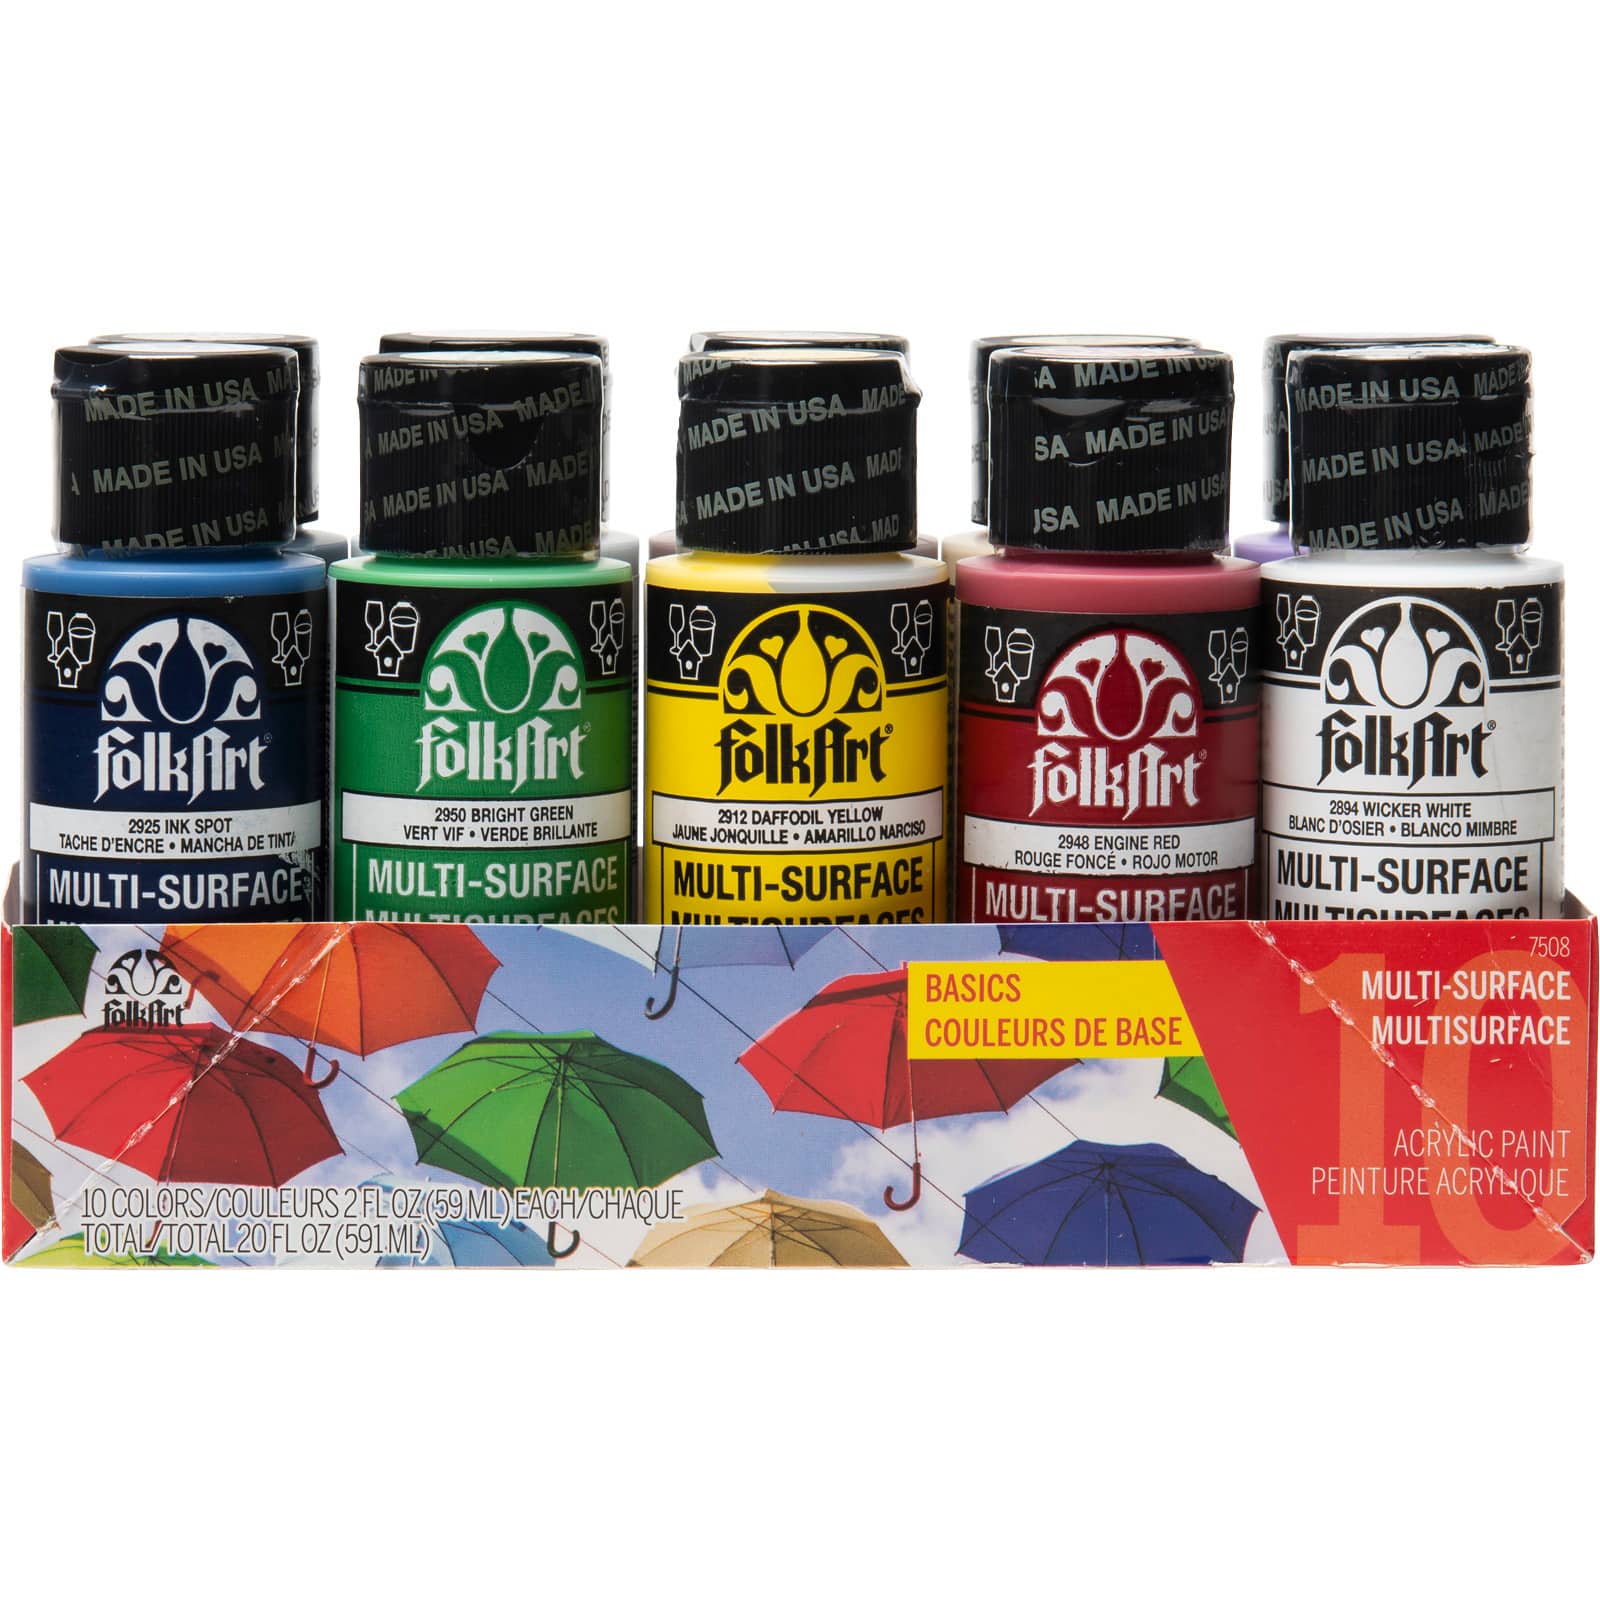 FolkArt Multi-Surface Paint in Assorted Colors (2 oz), 2894, Wicker White